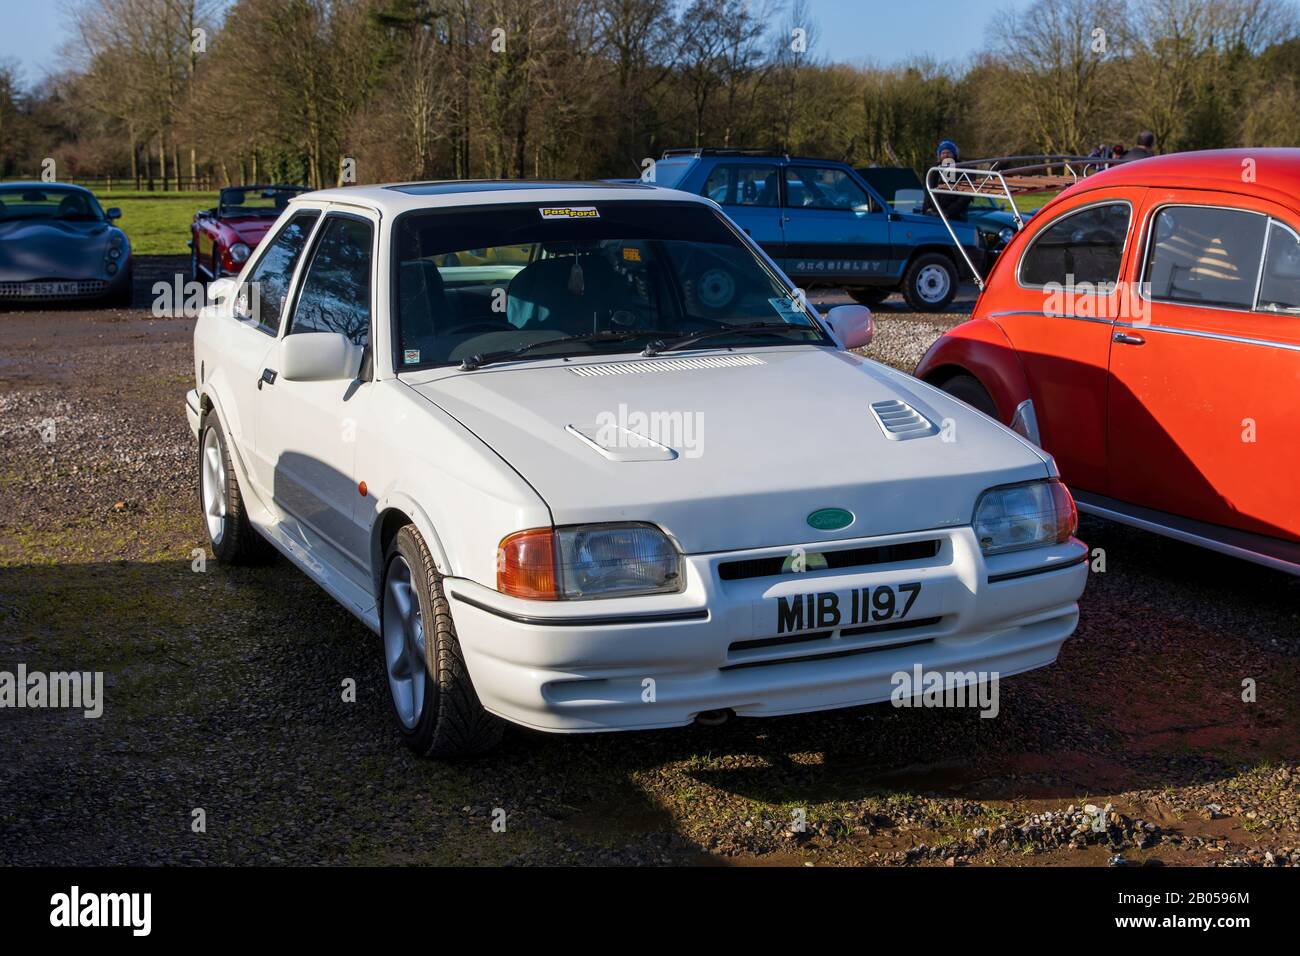 Ford Escort, 1990, Reg No: MIB 1197, at The Great Western Classic Car Show, Shepton Mallet UK, Febuary 08, 2020 Stock Photo